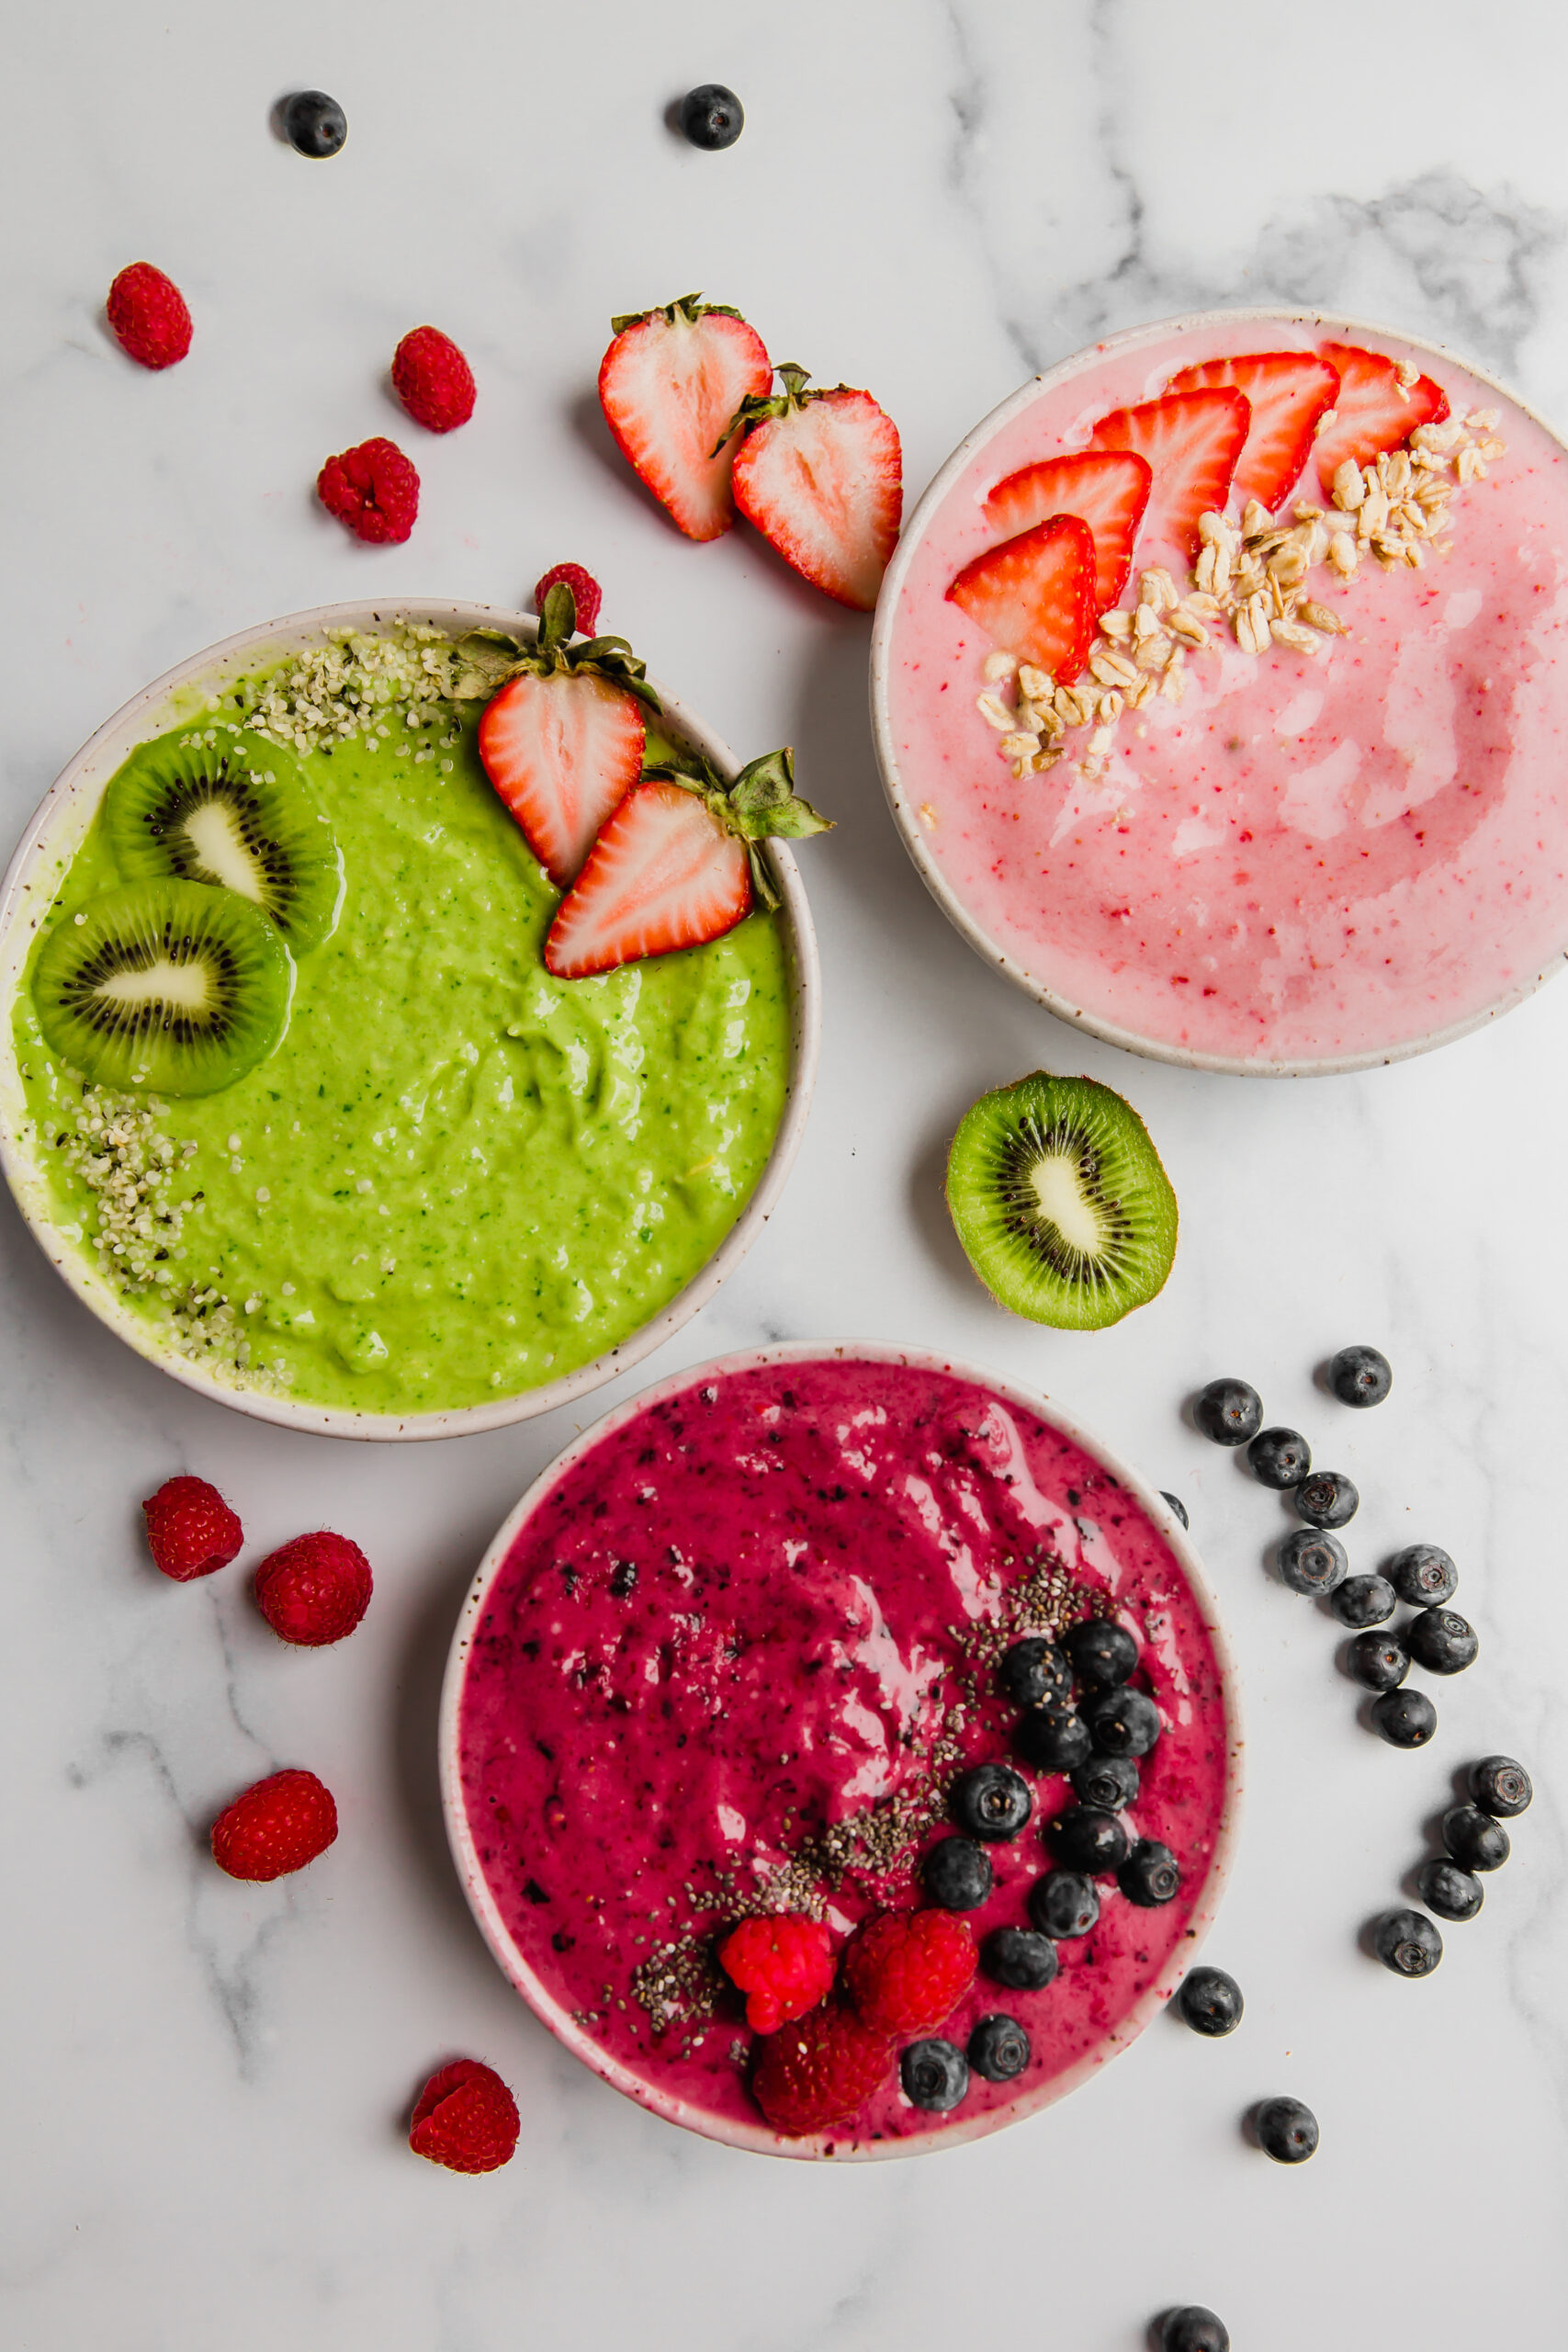 How Would You Describe The Perfect Smoothie? 